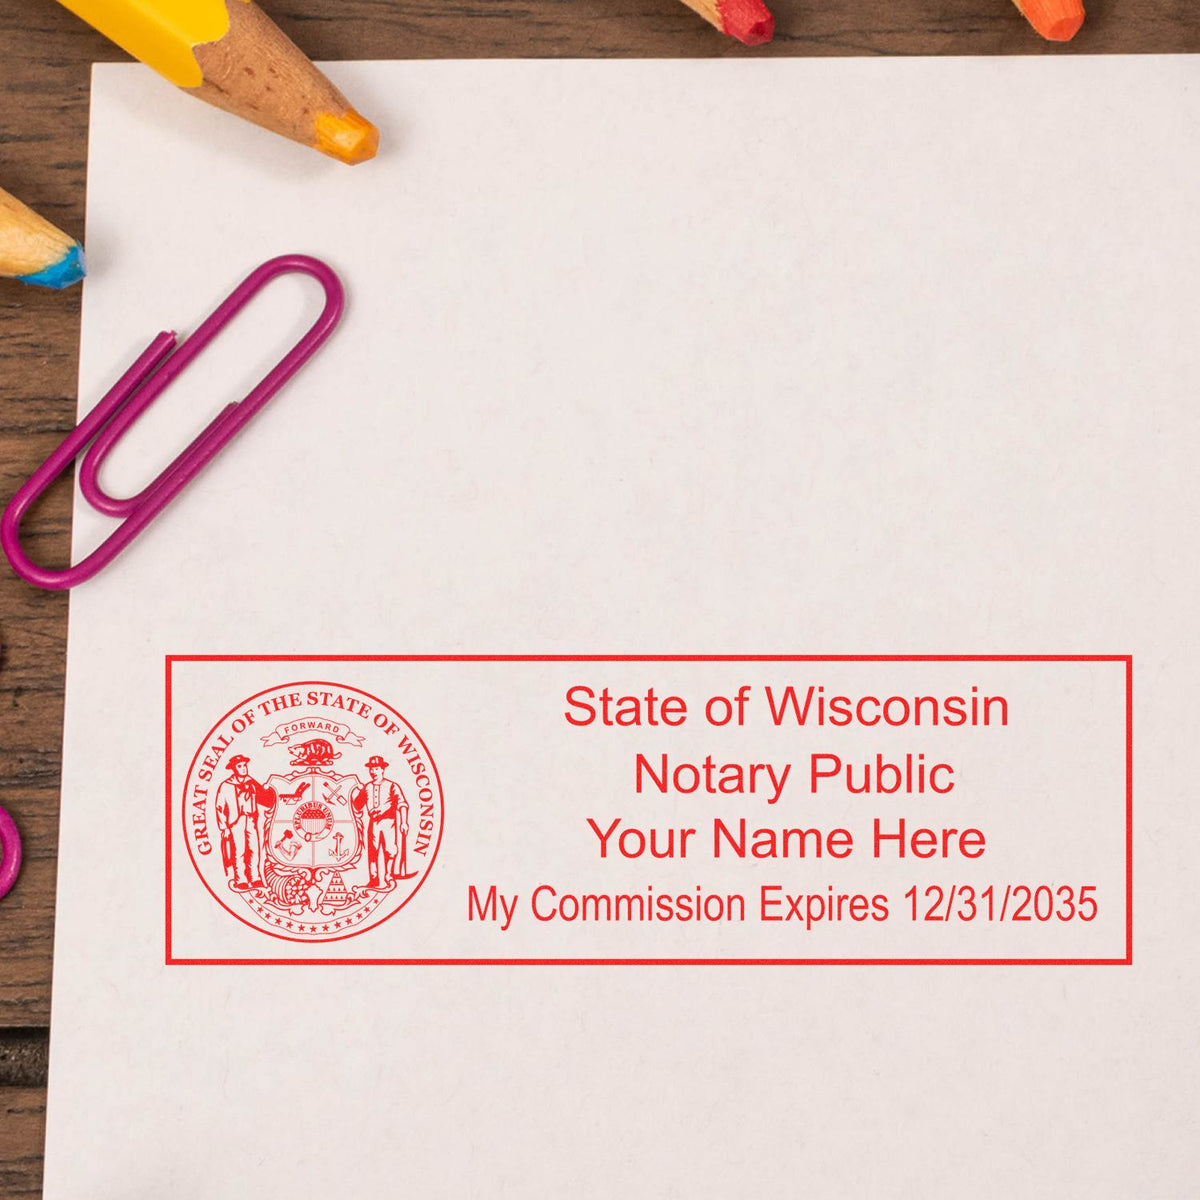 The Heavy-Duty Wisconsin Rectangular Notary Stamp stamp impression comes to life with a crisp, detailed photo on paper - showcasing true professional quality.